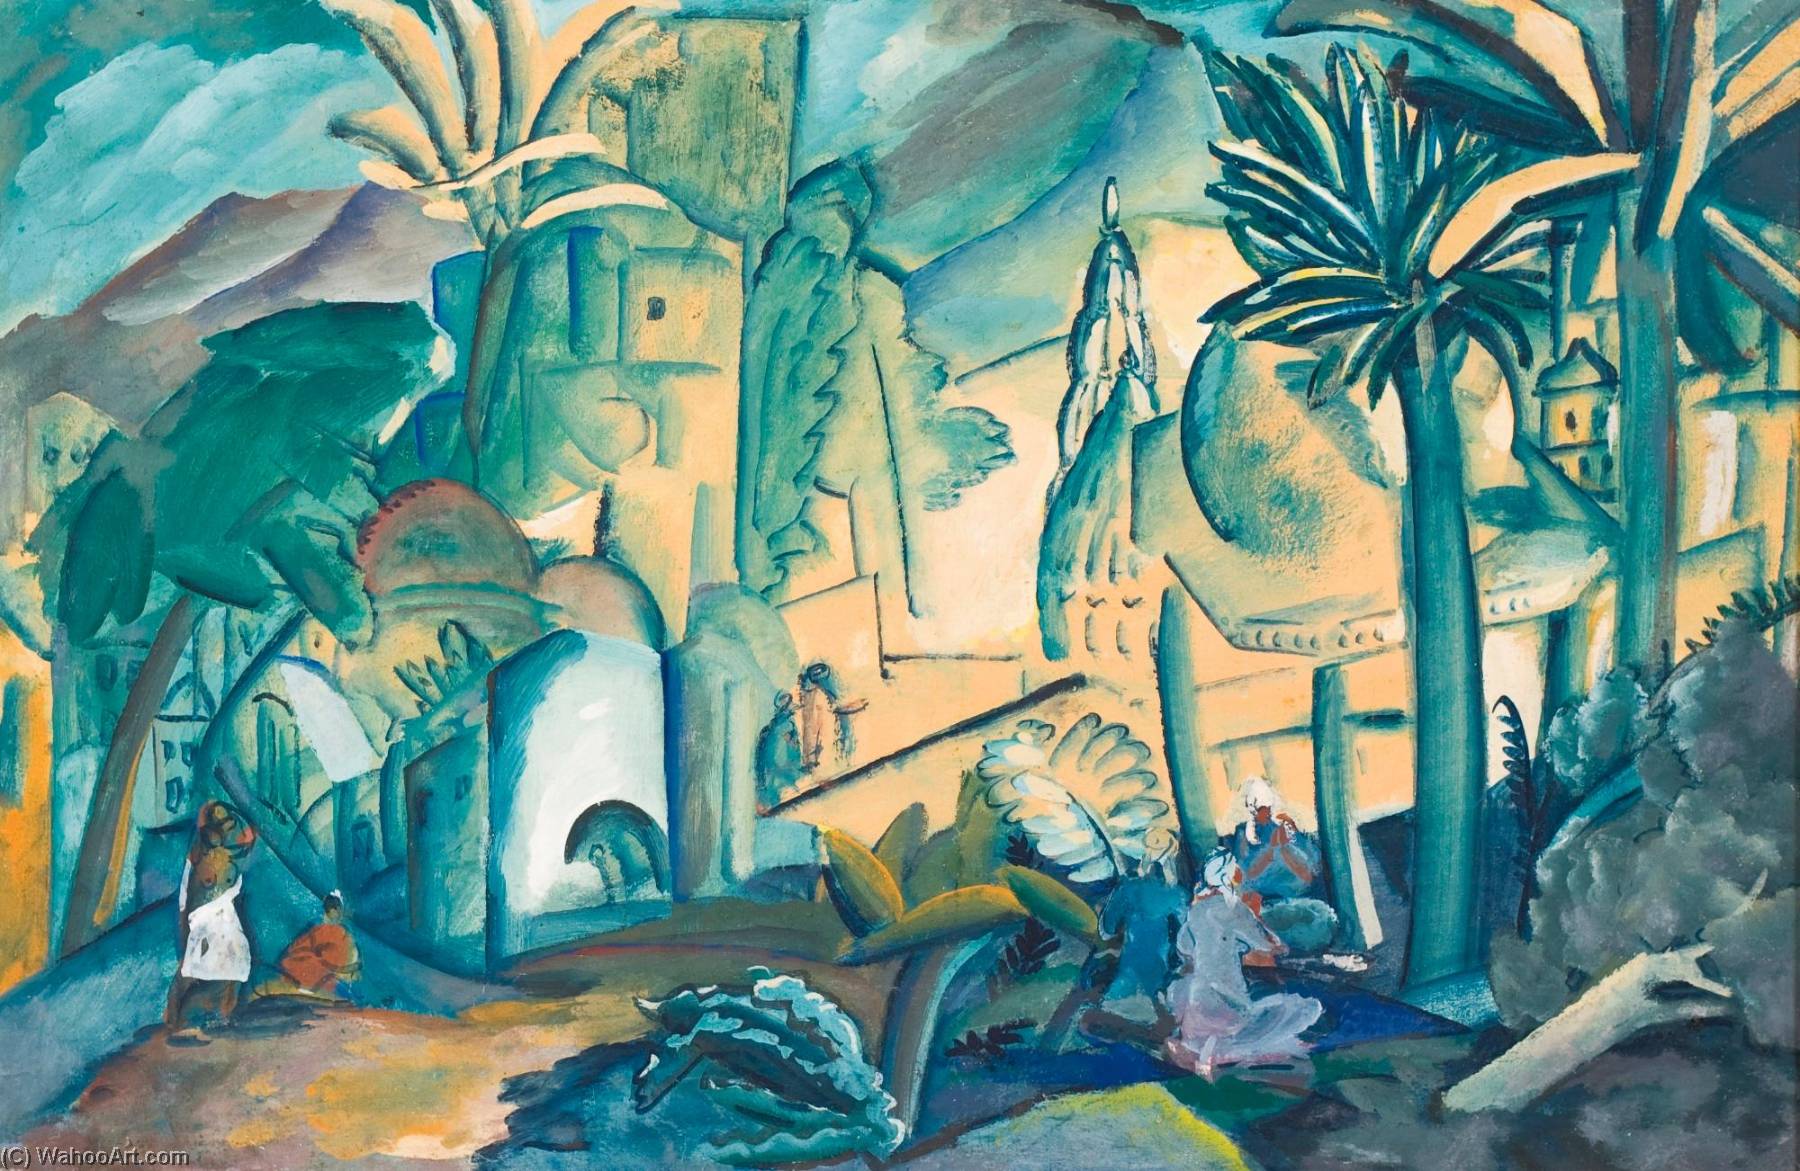 Landscape with Palm Trees, India by Aleksey Ilych Kravchenko Aleksey Ilych Kravchenko | ArtsDot.com